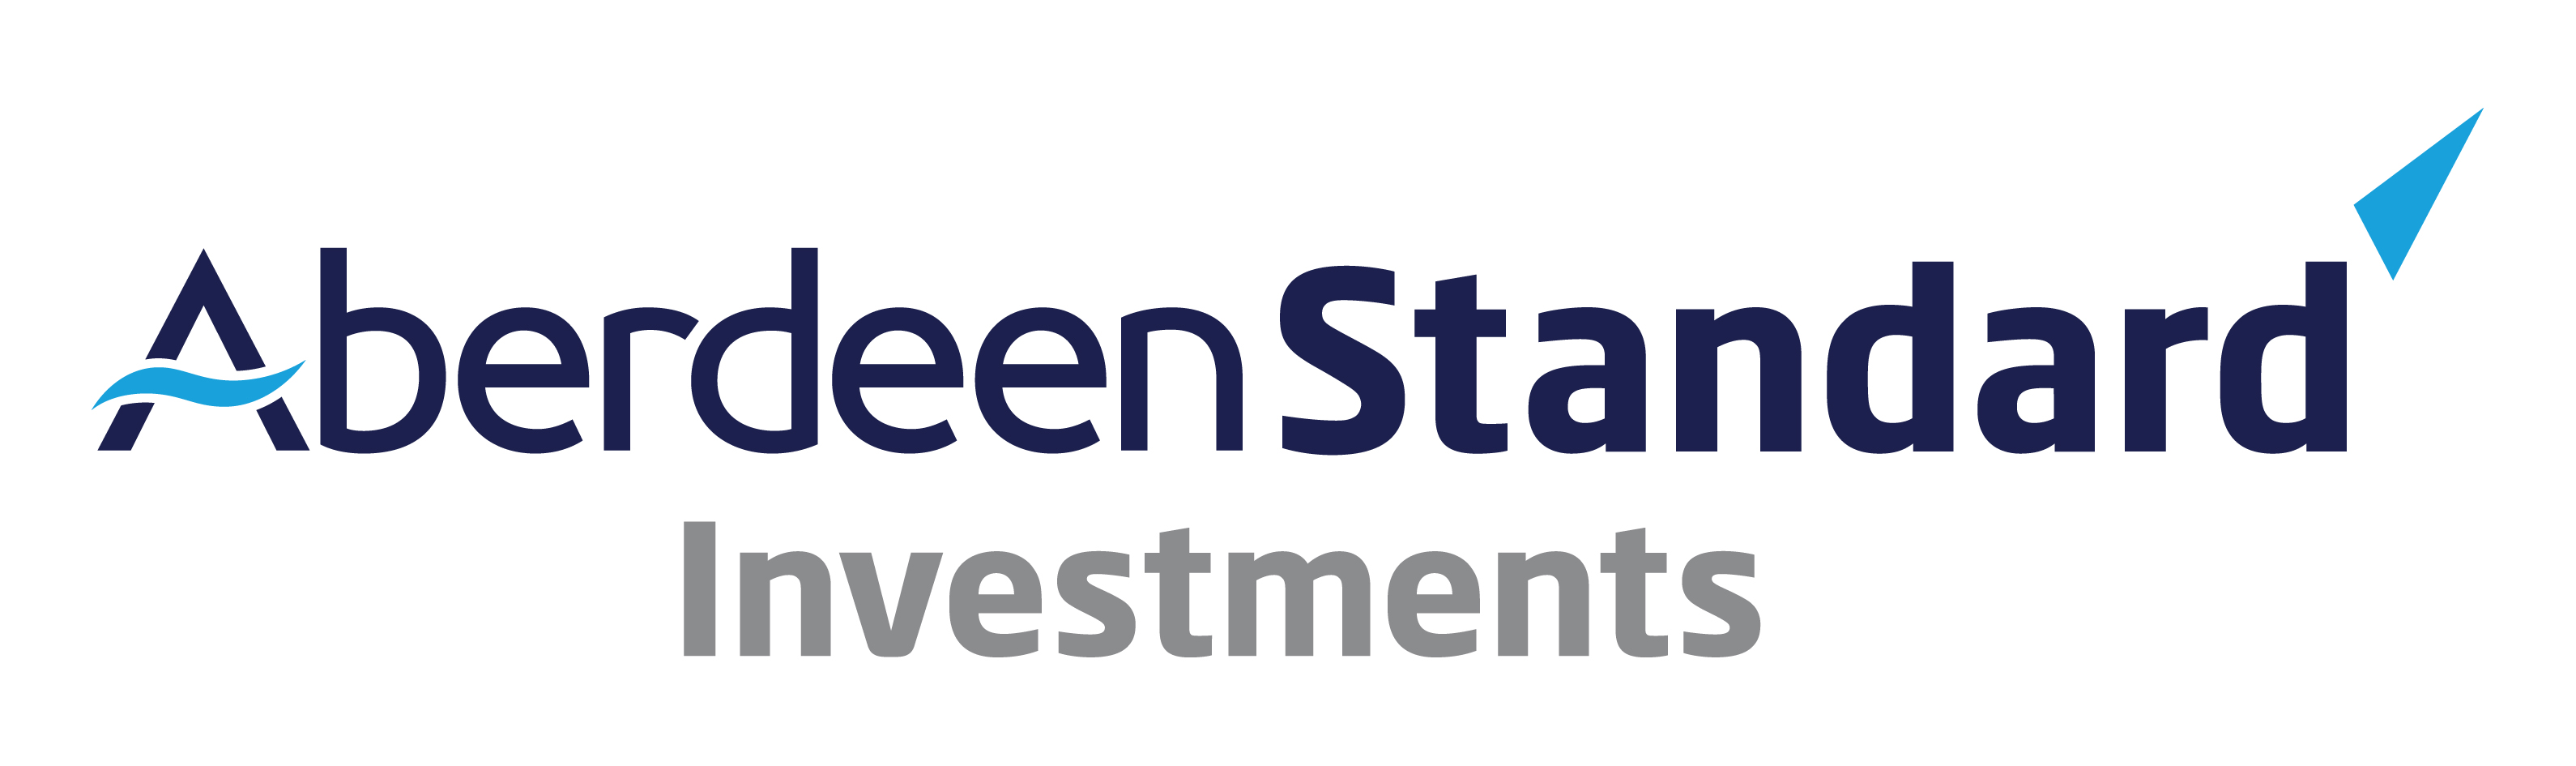 Aberdeen Asia-Pacific Income Investment Company Limited, Tuesday, July 27, 2021, Press release picture